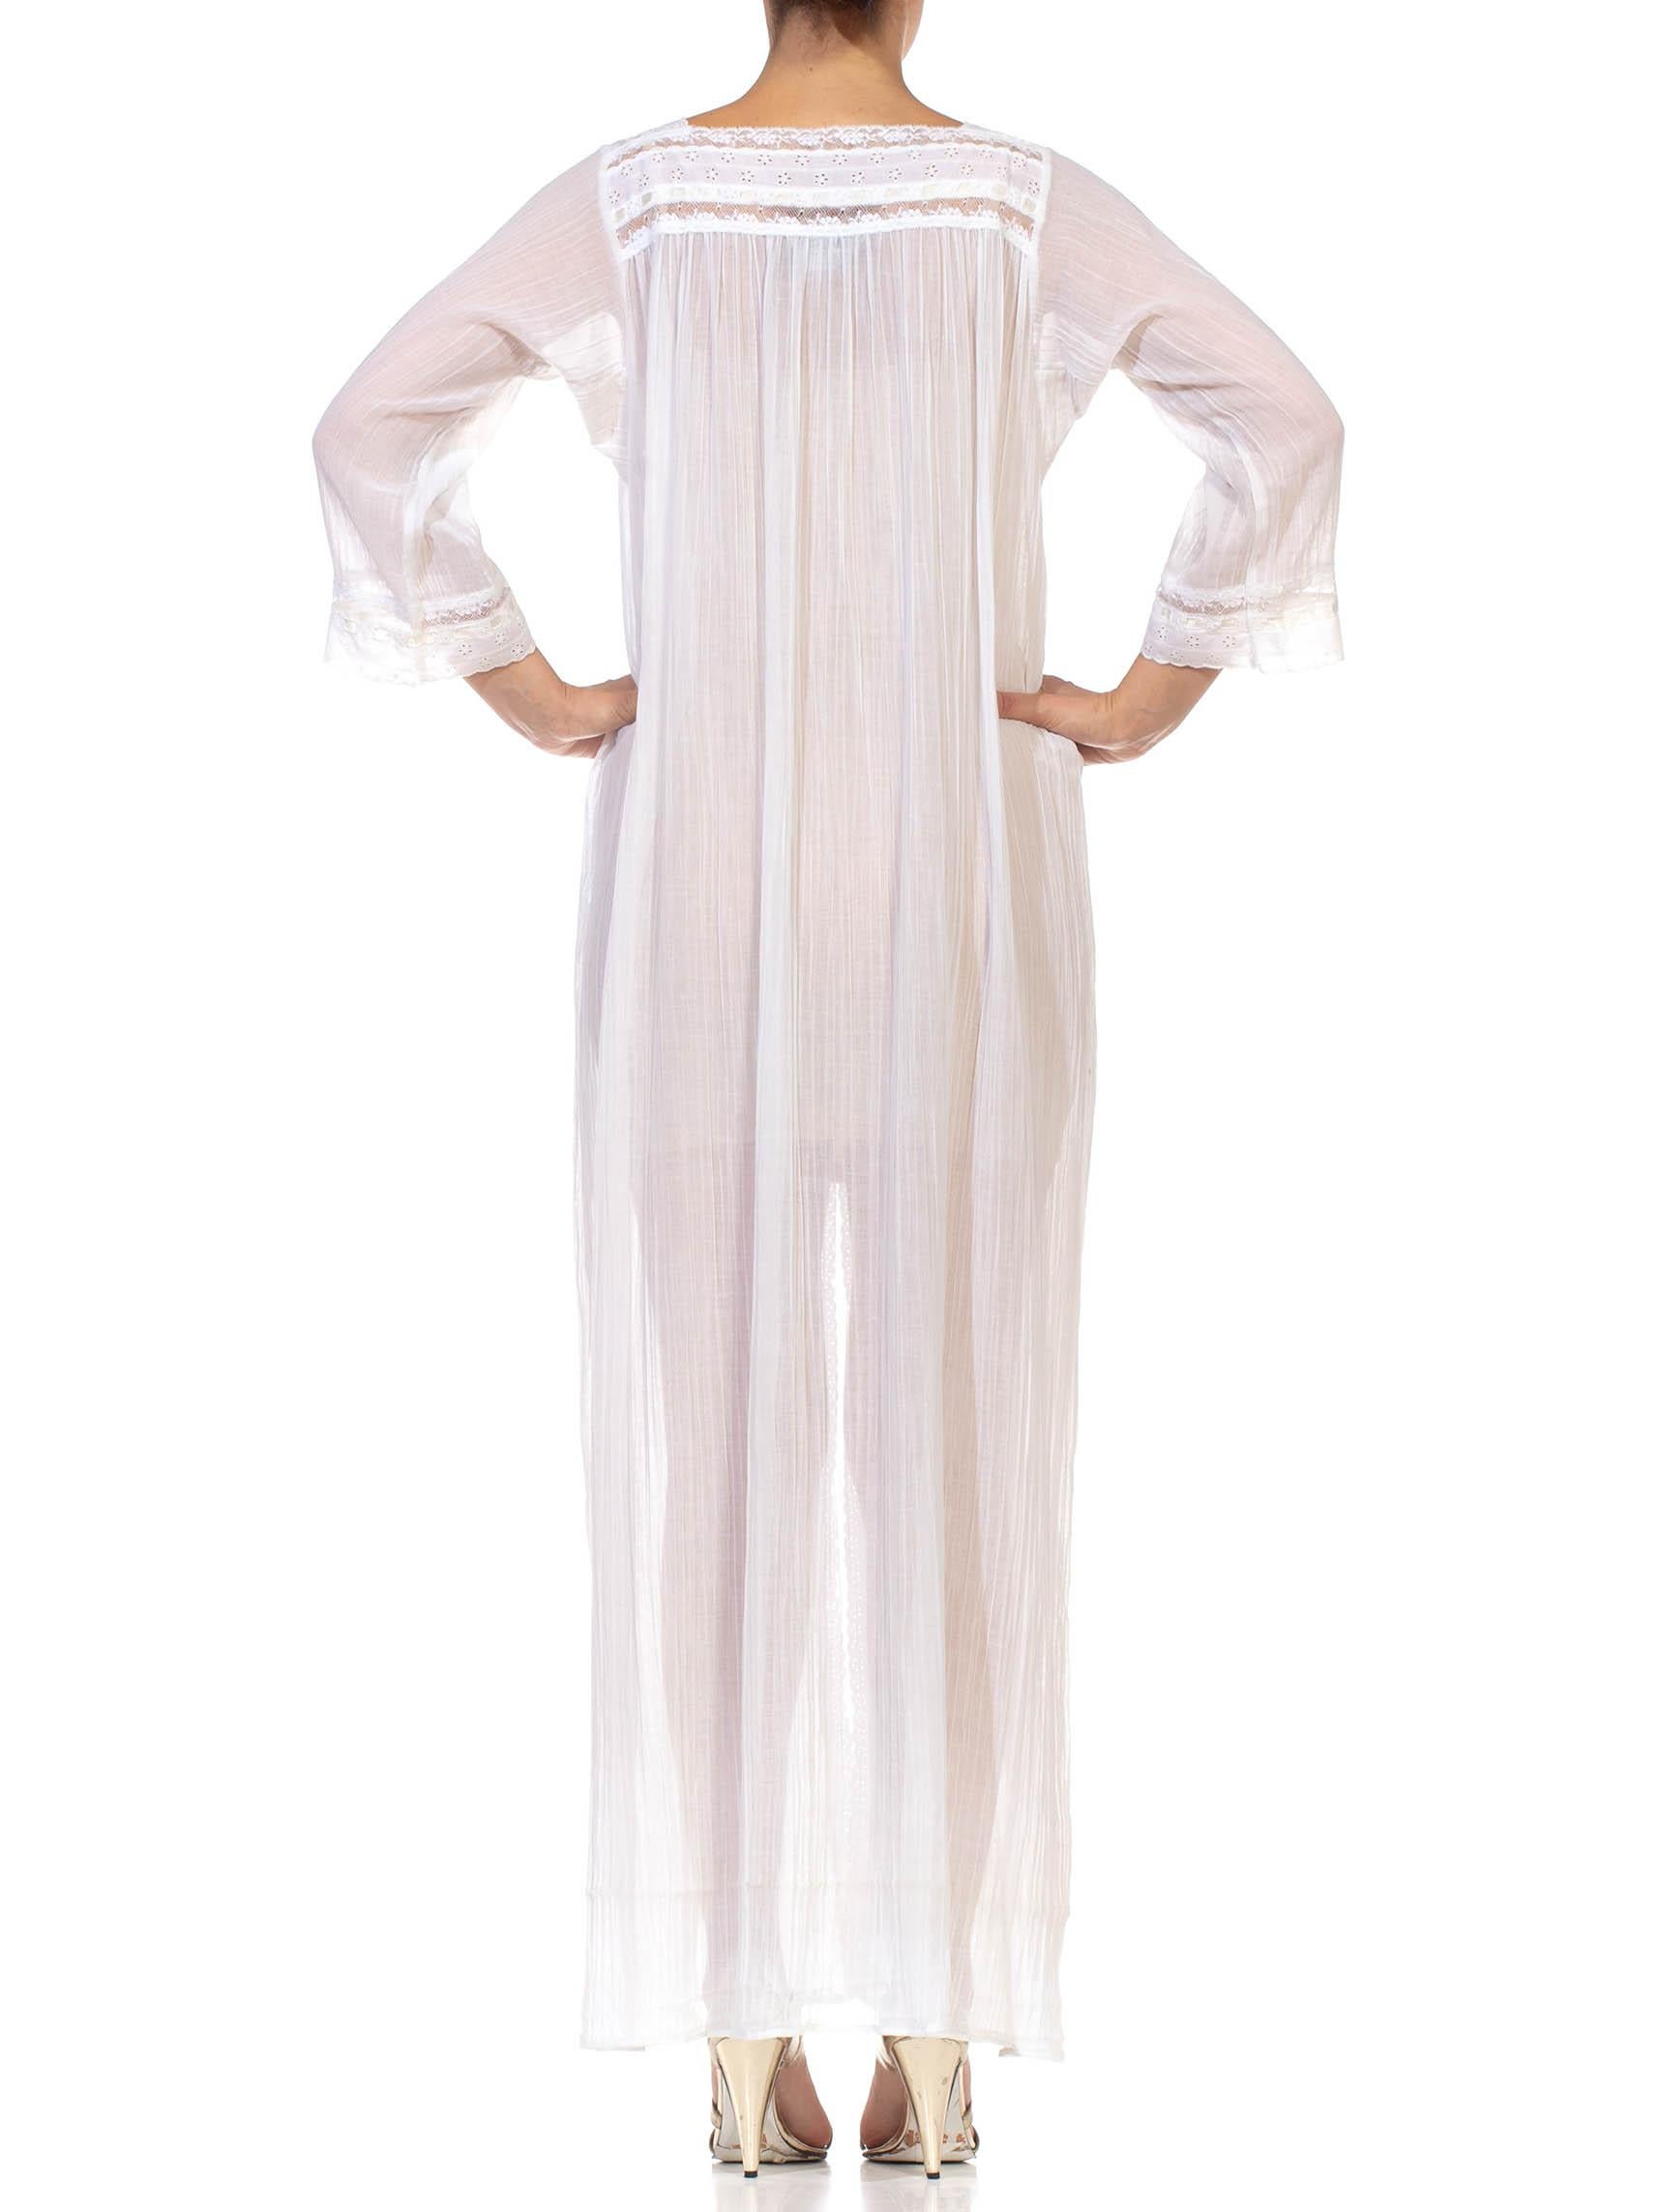 1980S CHRISTIAN DIOR White Cotton Lace Trimed Robe With Front Tie Closure 3